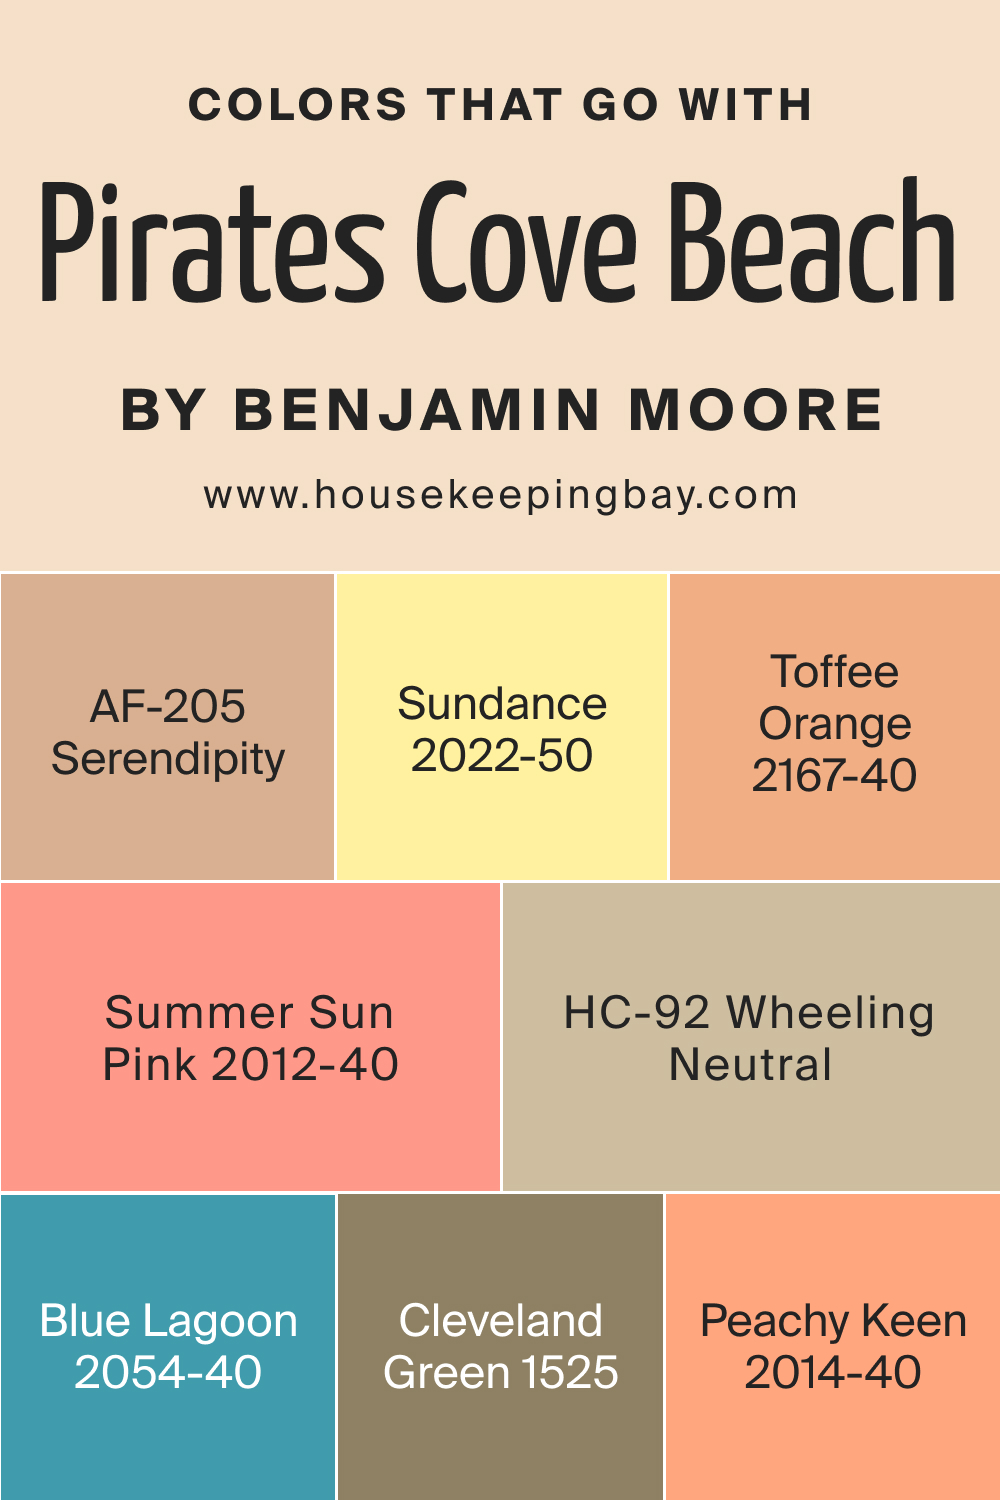 Colors that goes with Pirates Cove Beach OC 80 by Benjamin Moore